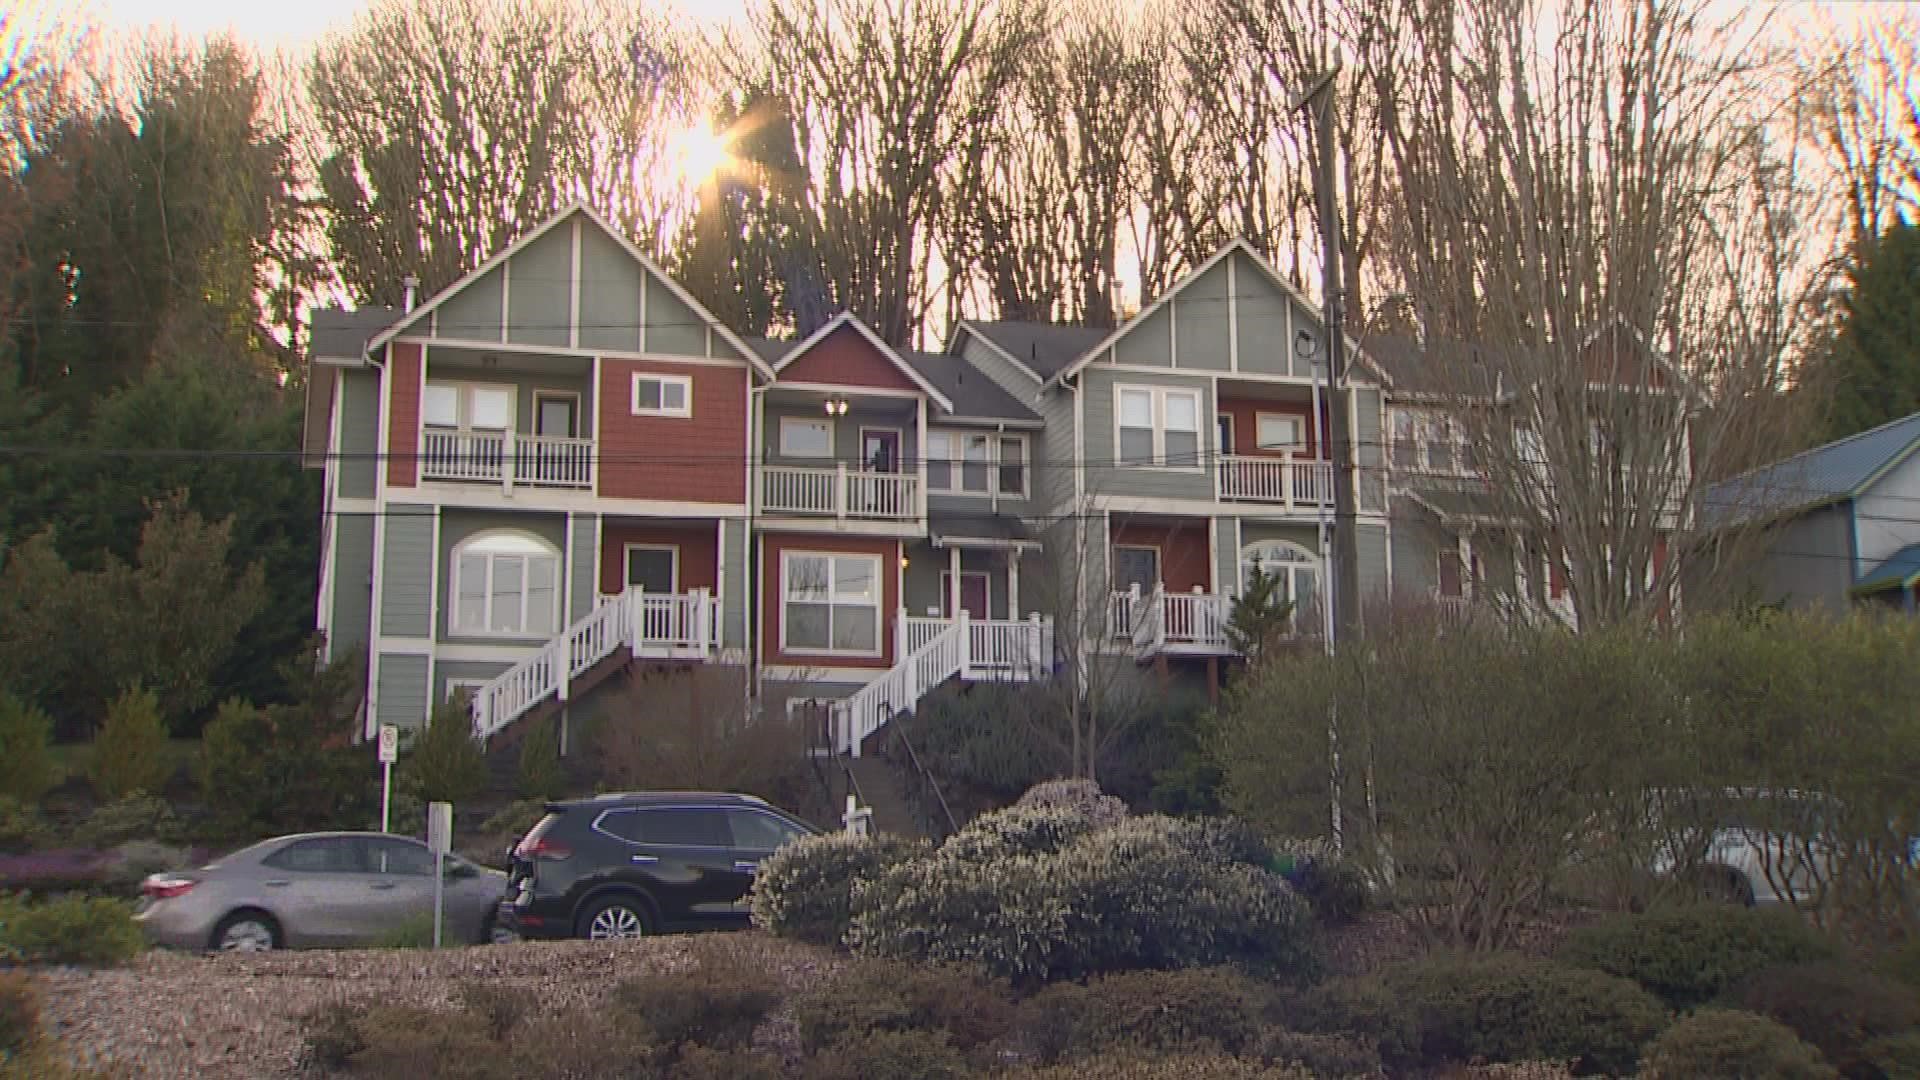 King County estimates 12,000 applicants will need assistance after the eviction moratorium bridge expires.